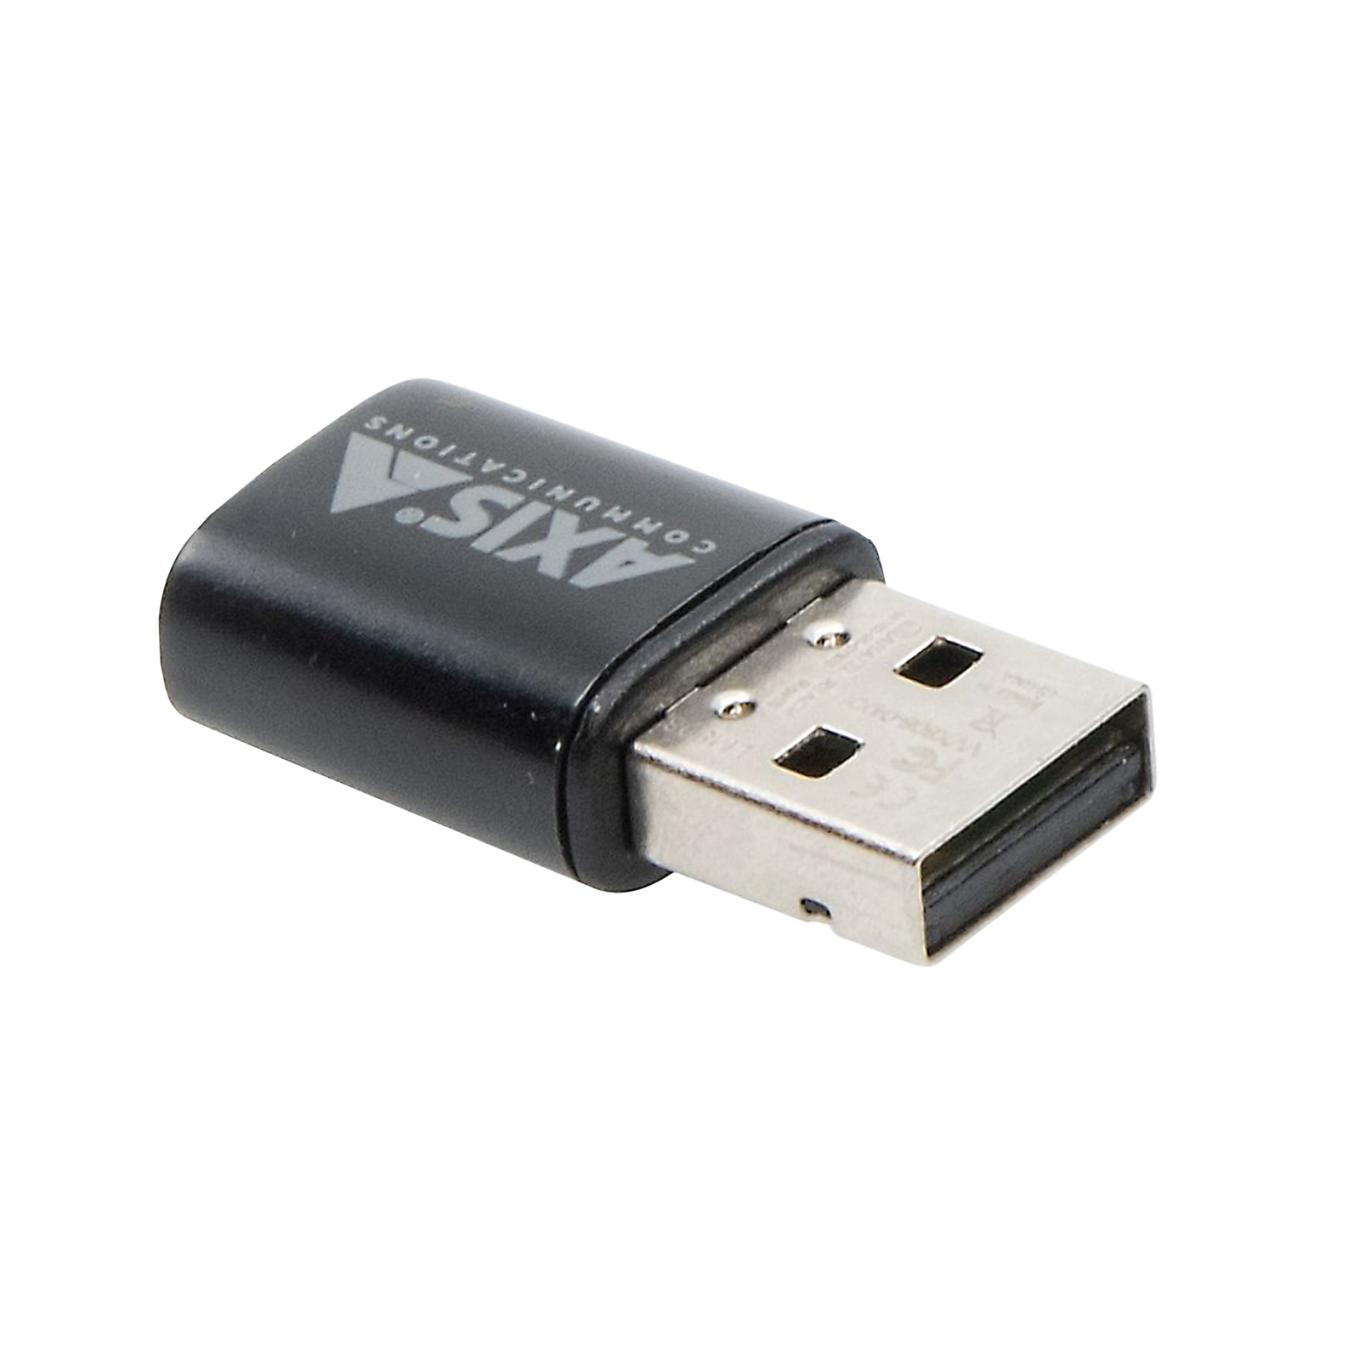 AXIS TU9004 Wireless Dongle | Axis Communications